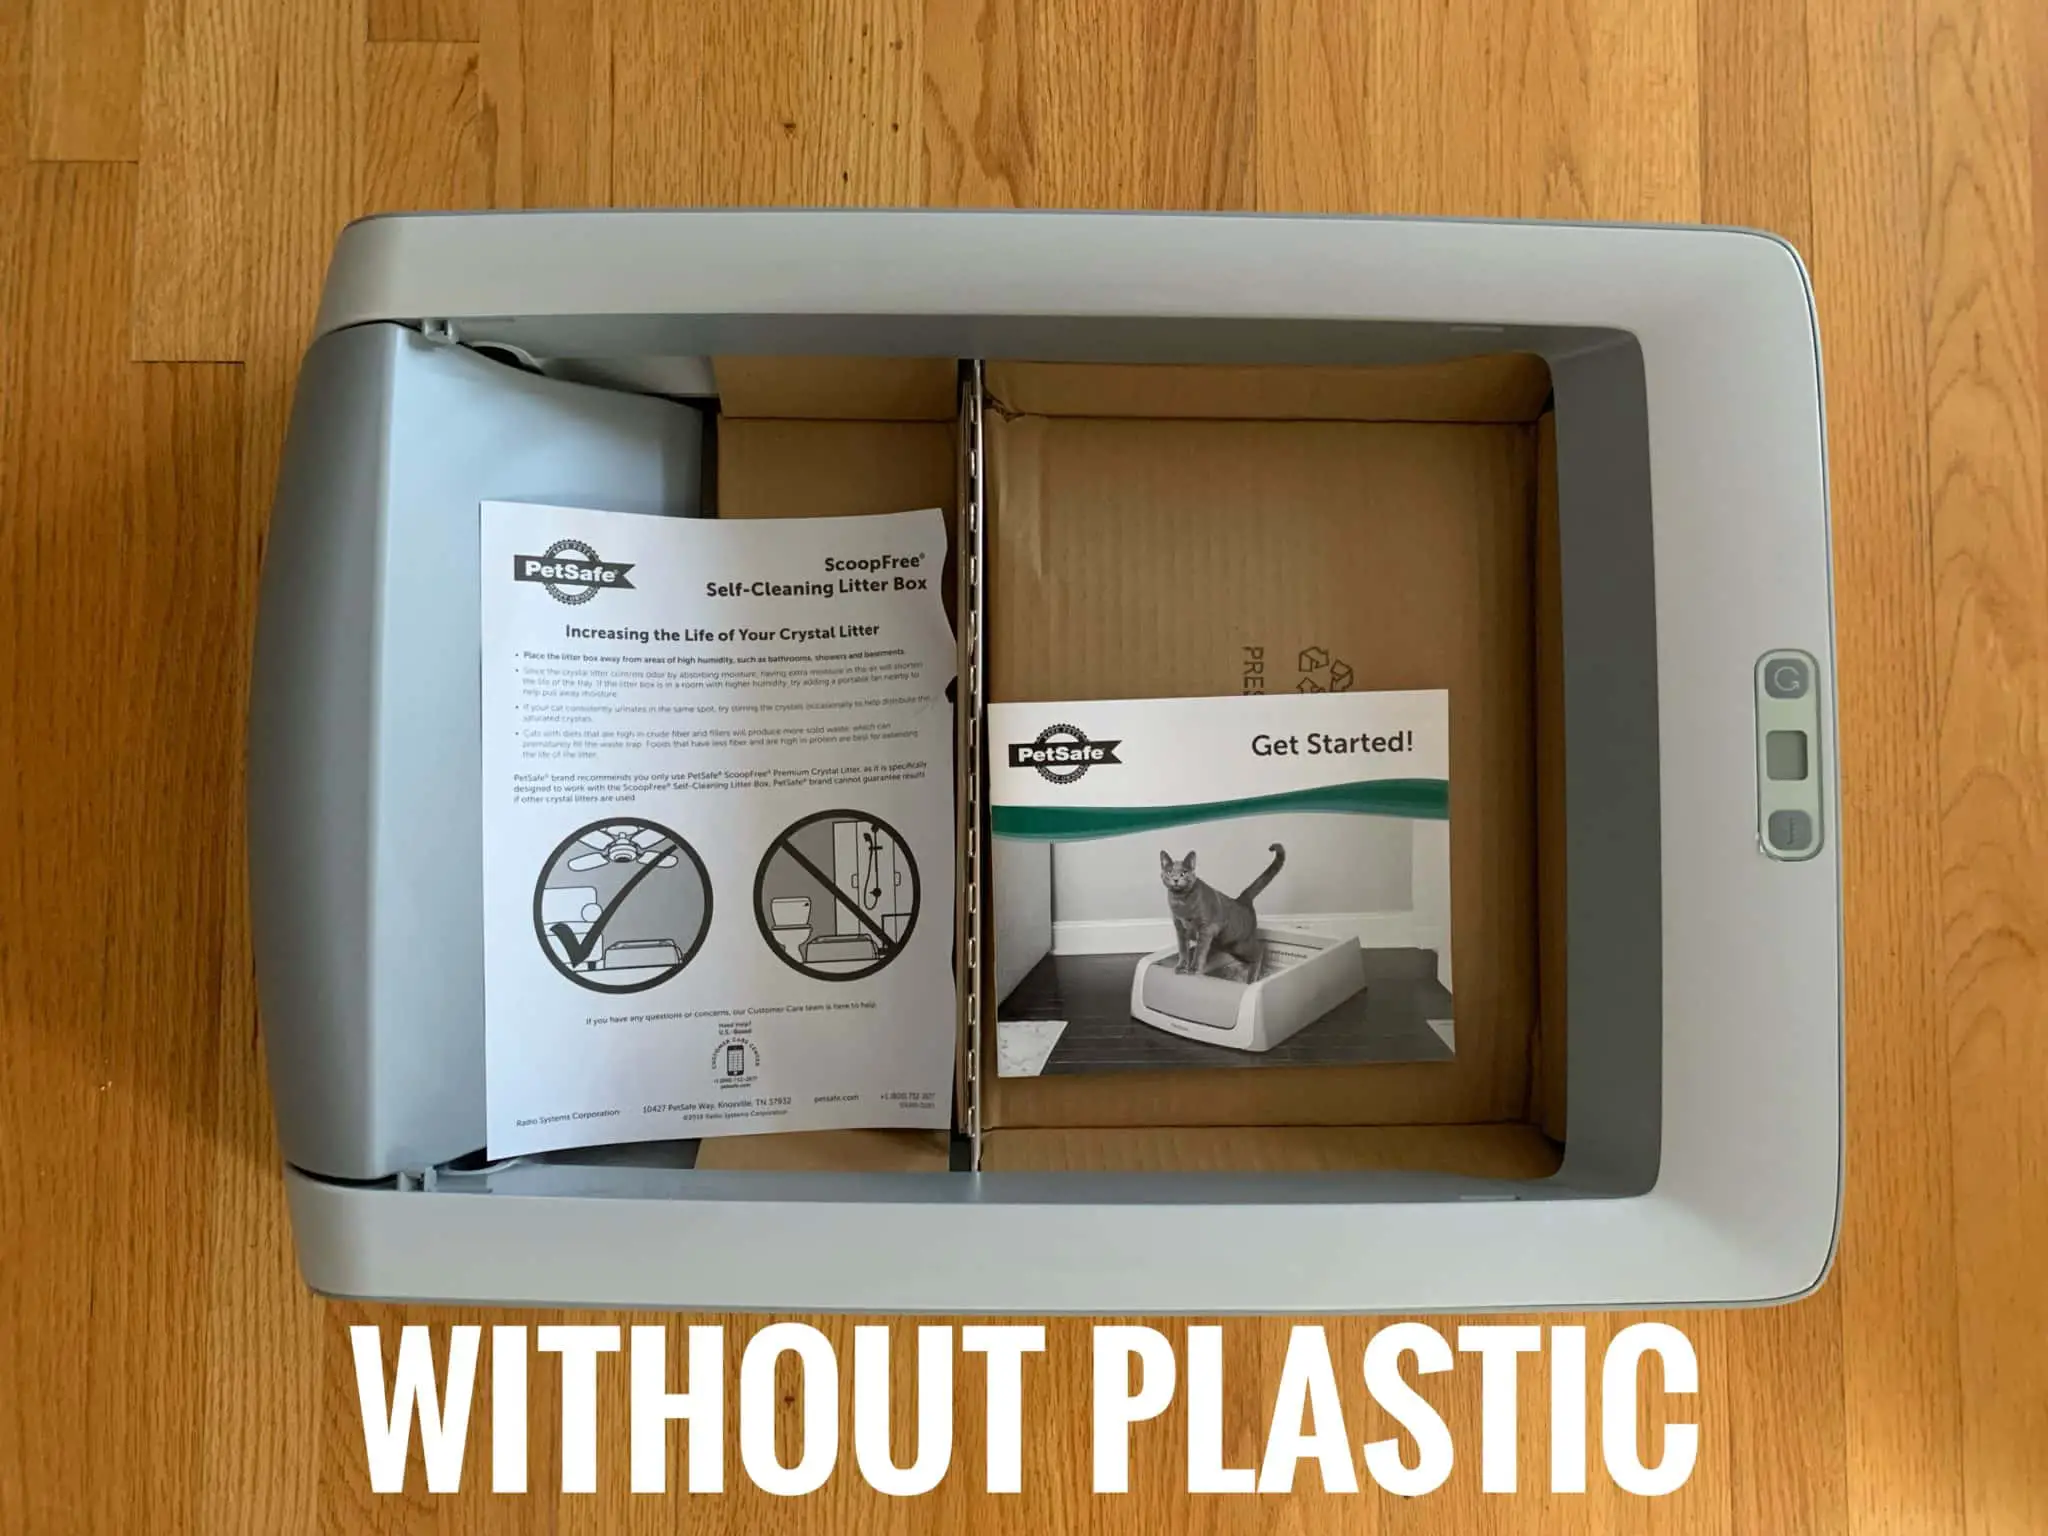 without plastic petsafe scoop-free litter box unboxed